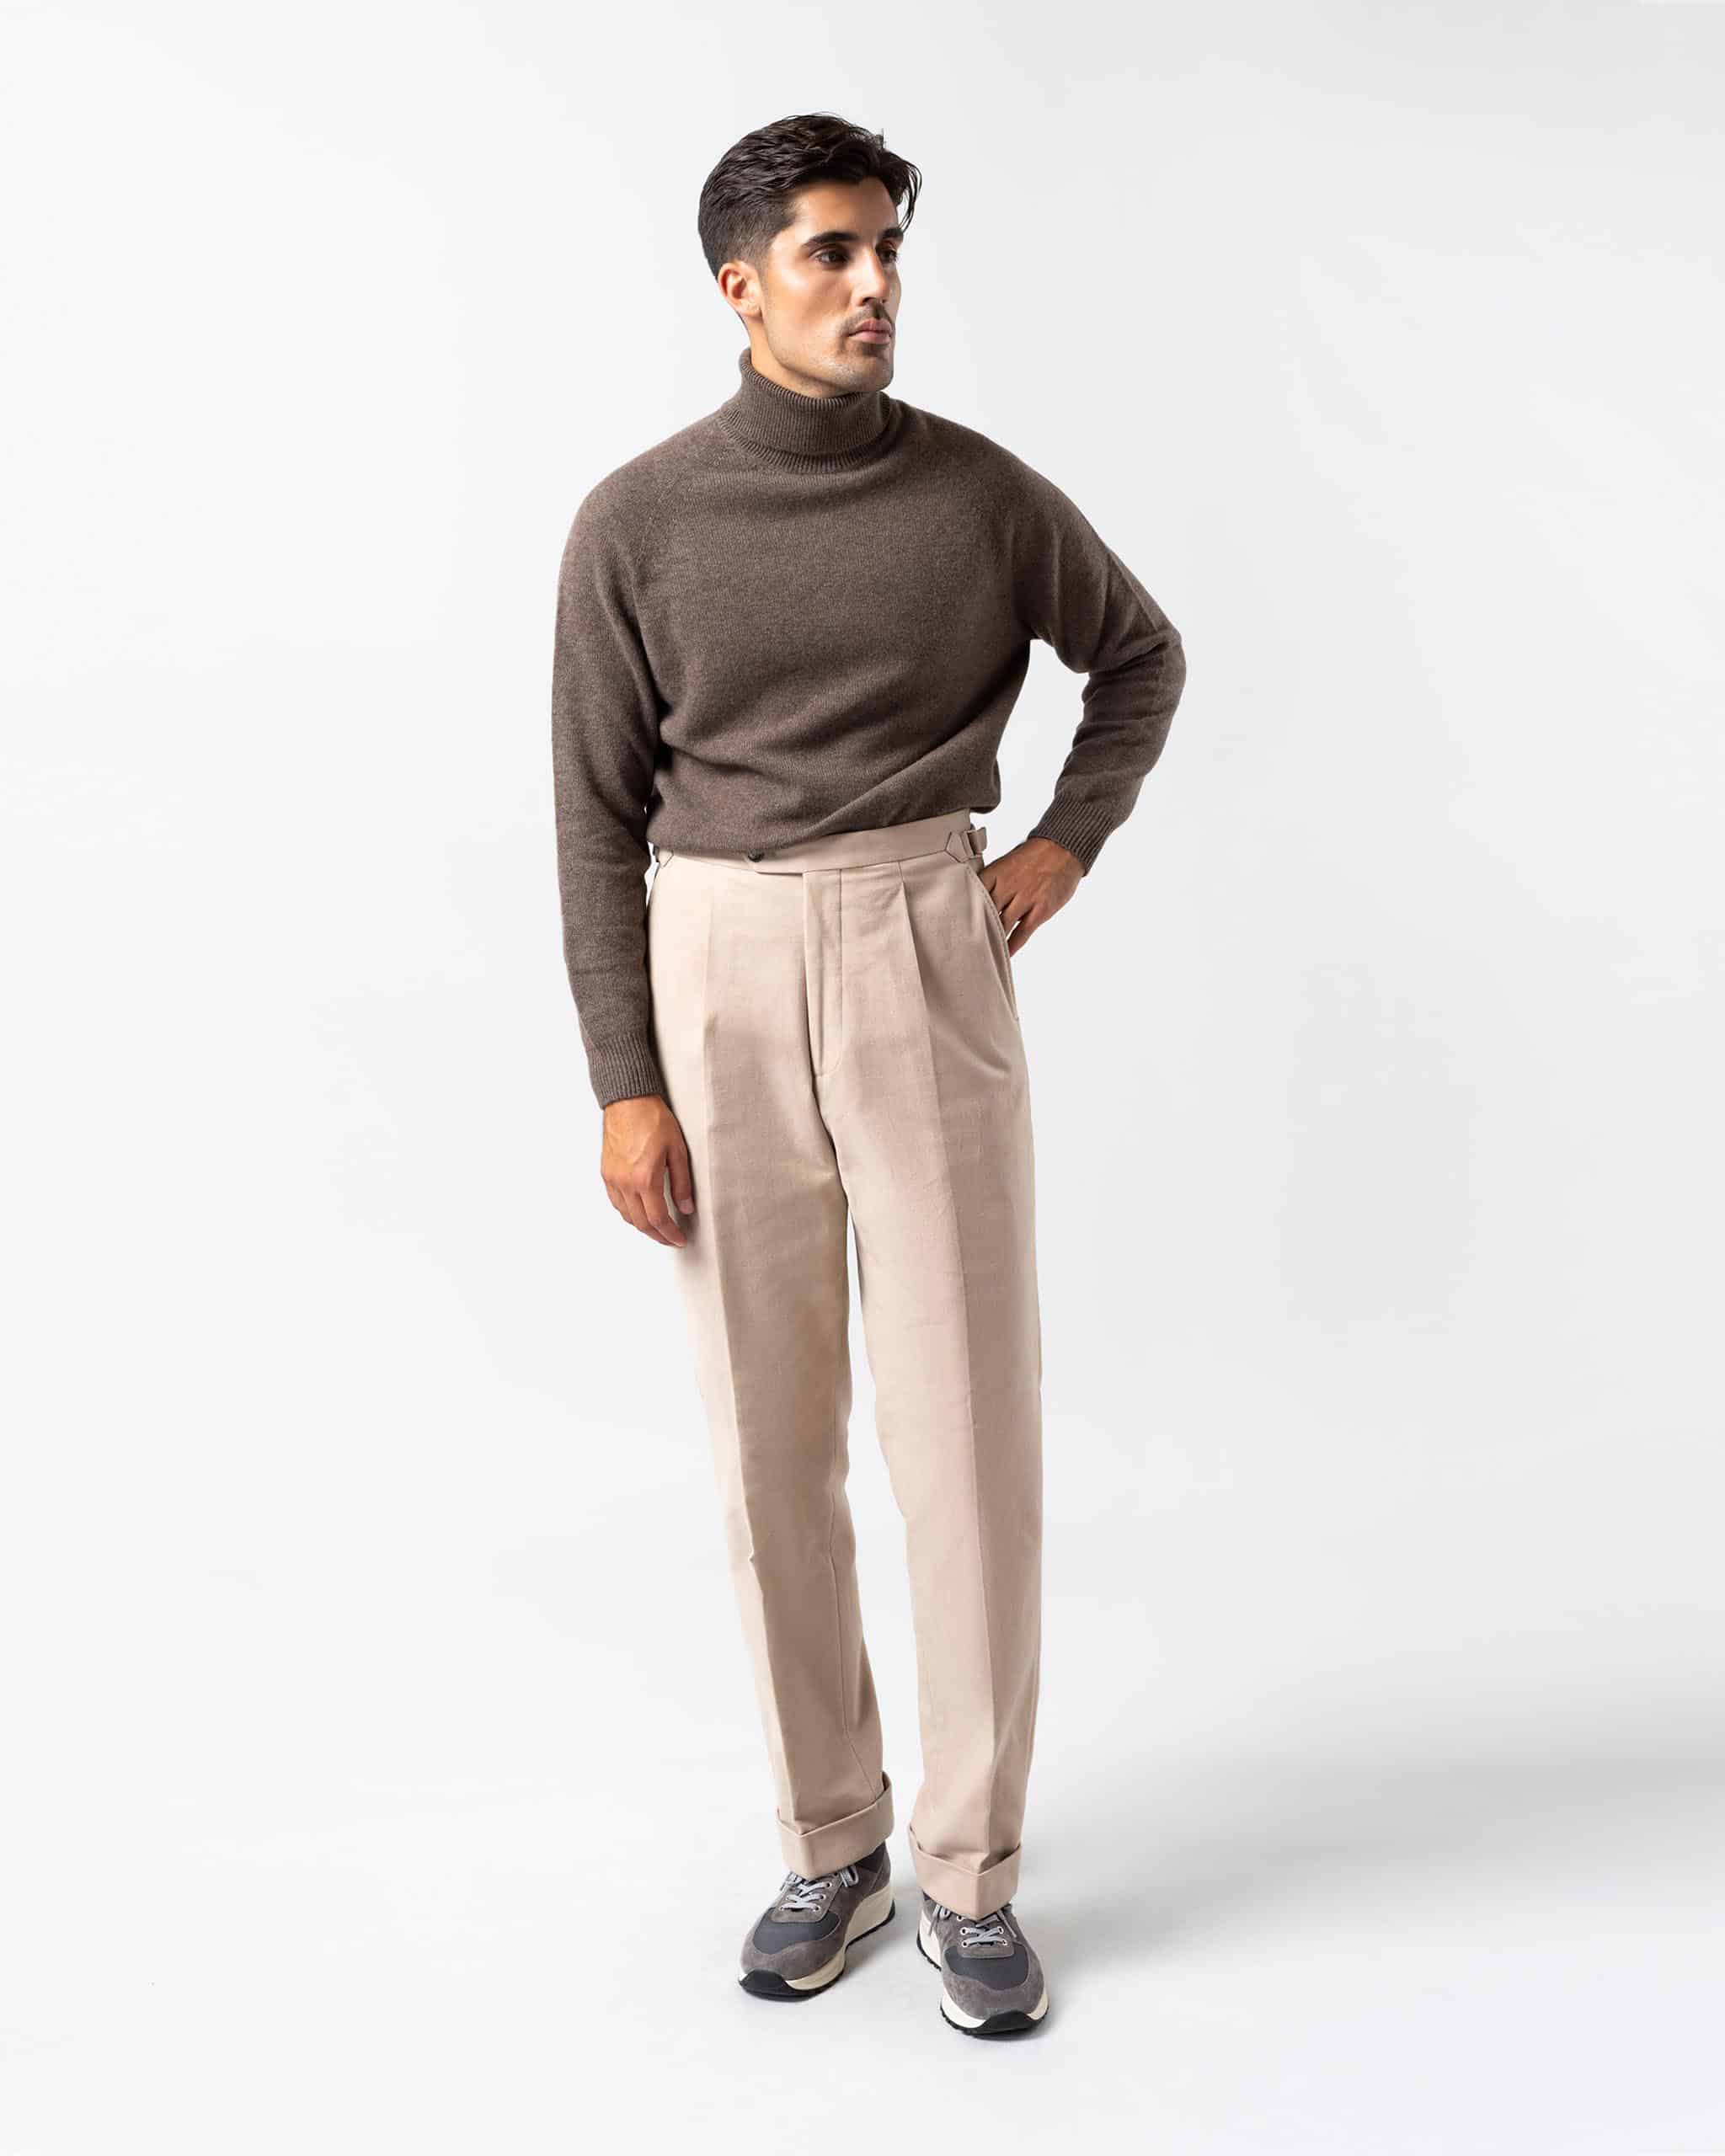 Wool cashmere roll neck brown image 6